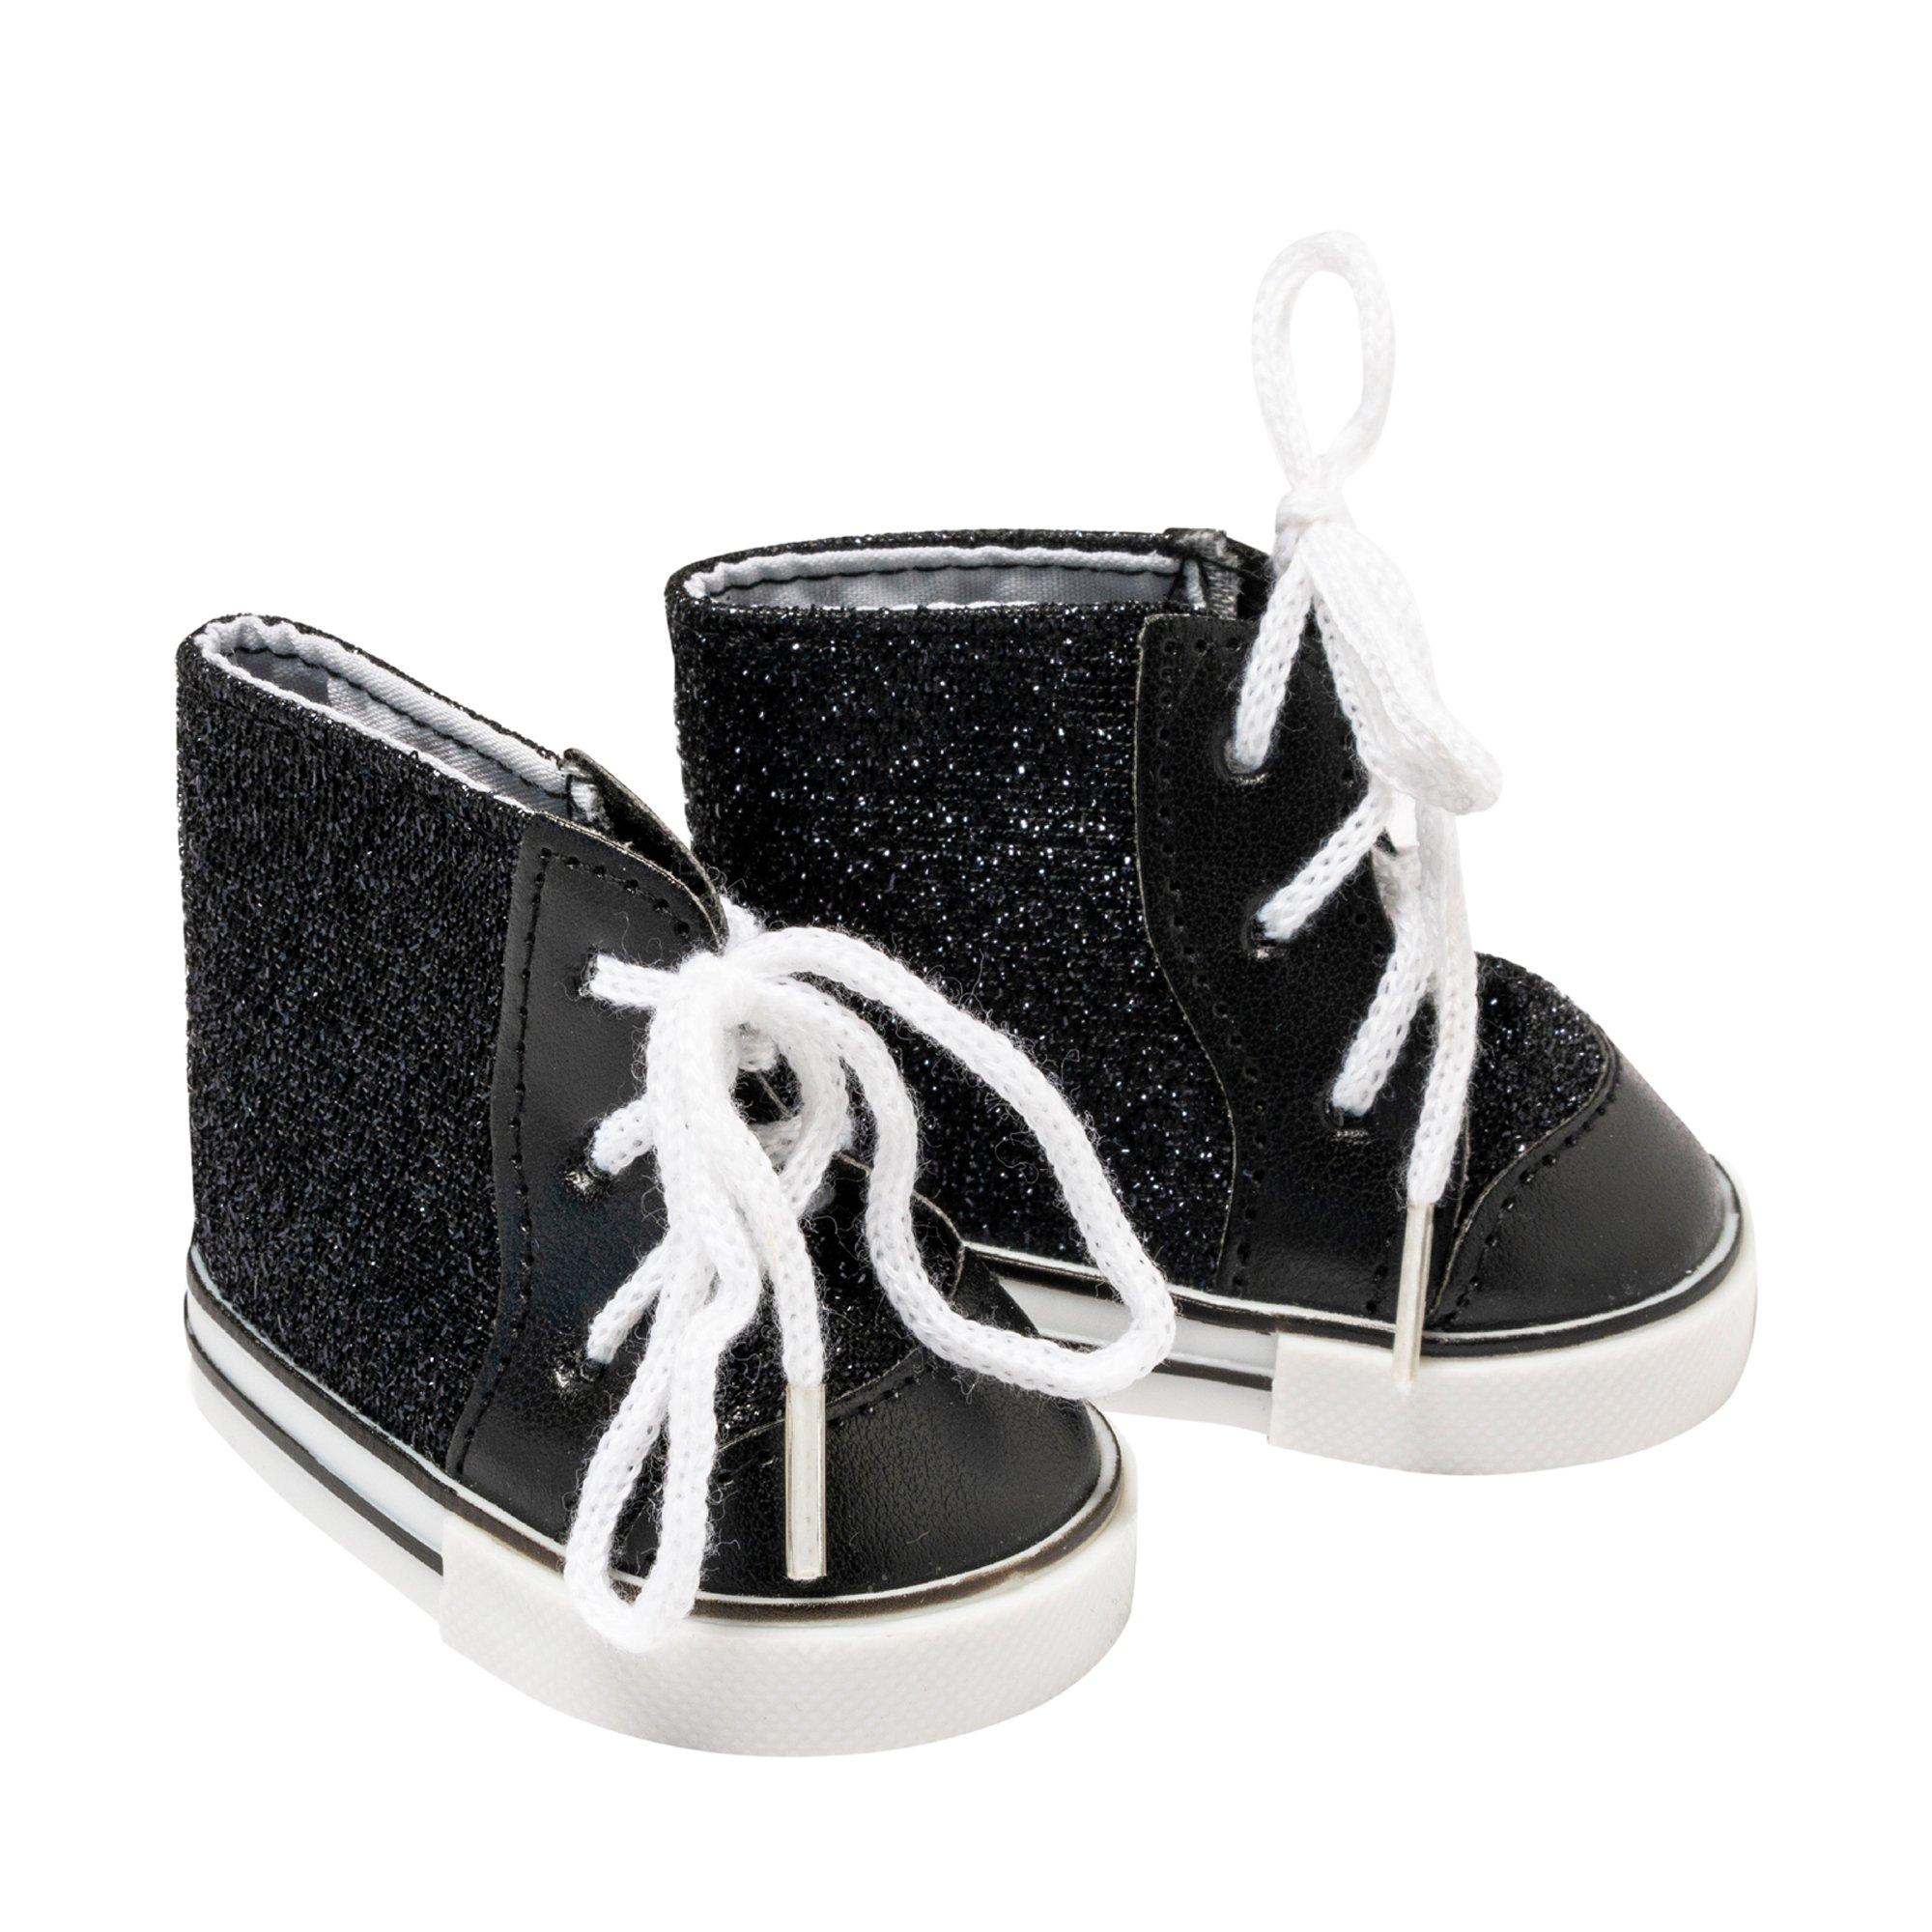 Image of I'm A Girly IAG BLACK BOOTS & WHITE LACES Black Boots & White Laces - ONE SIZE